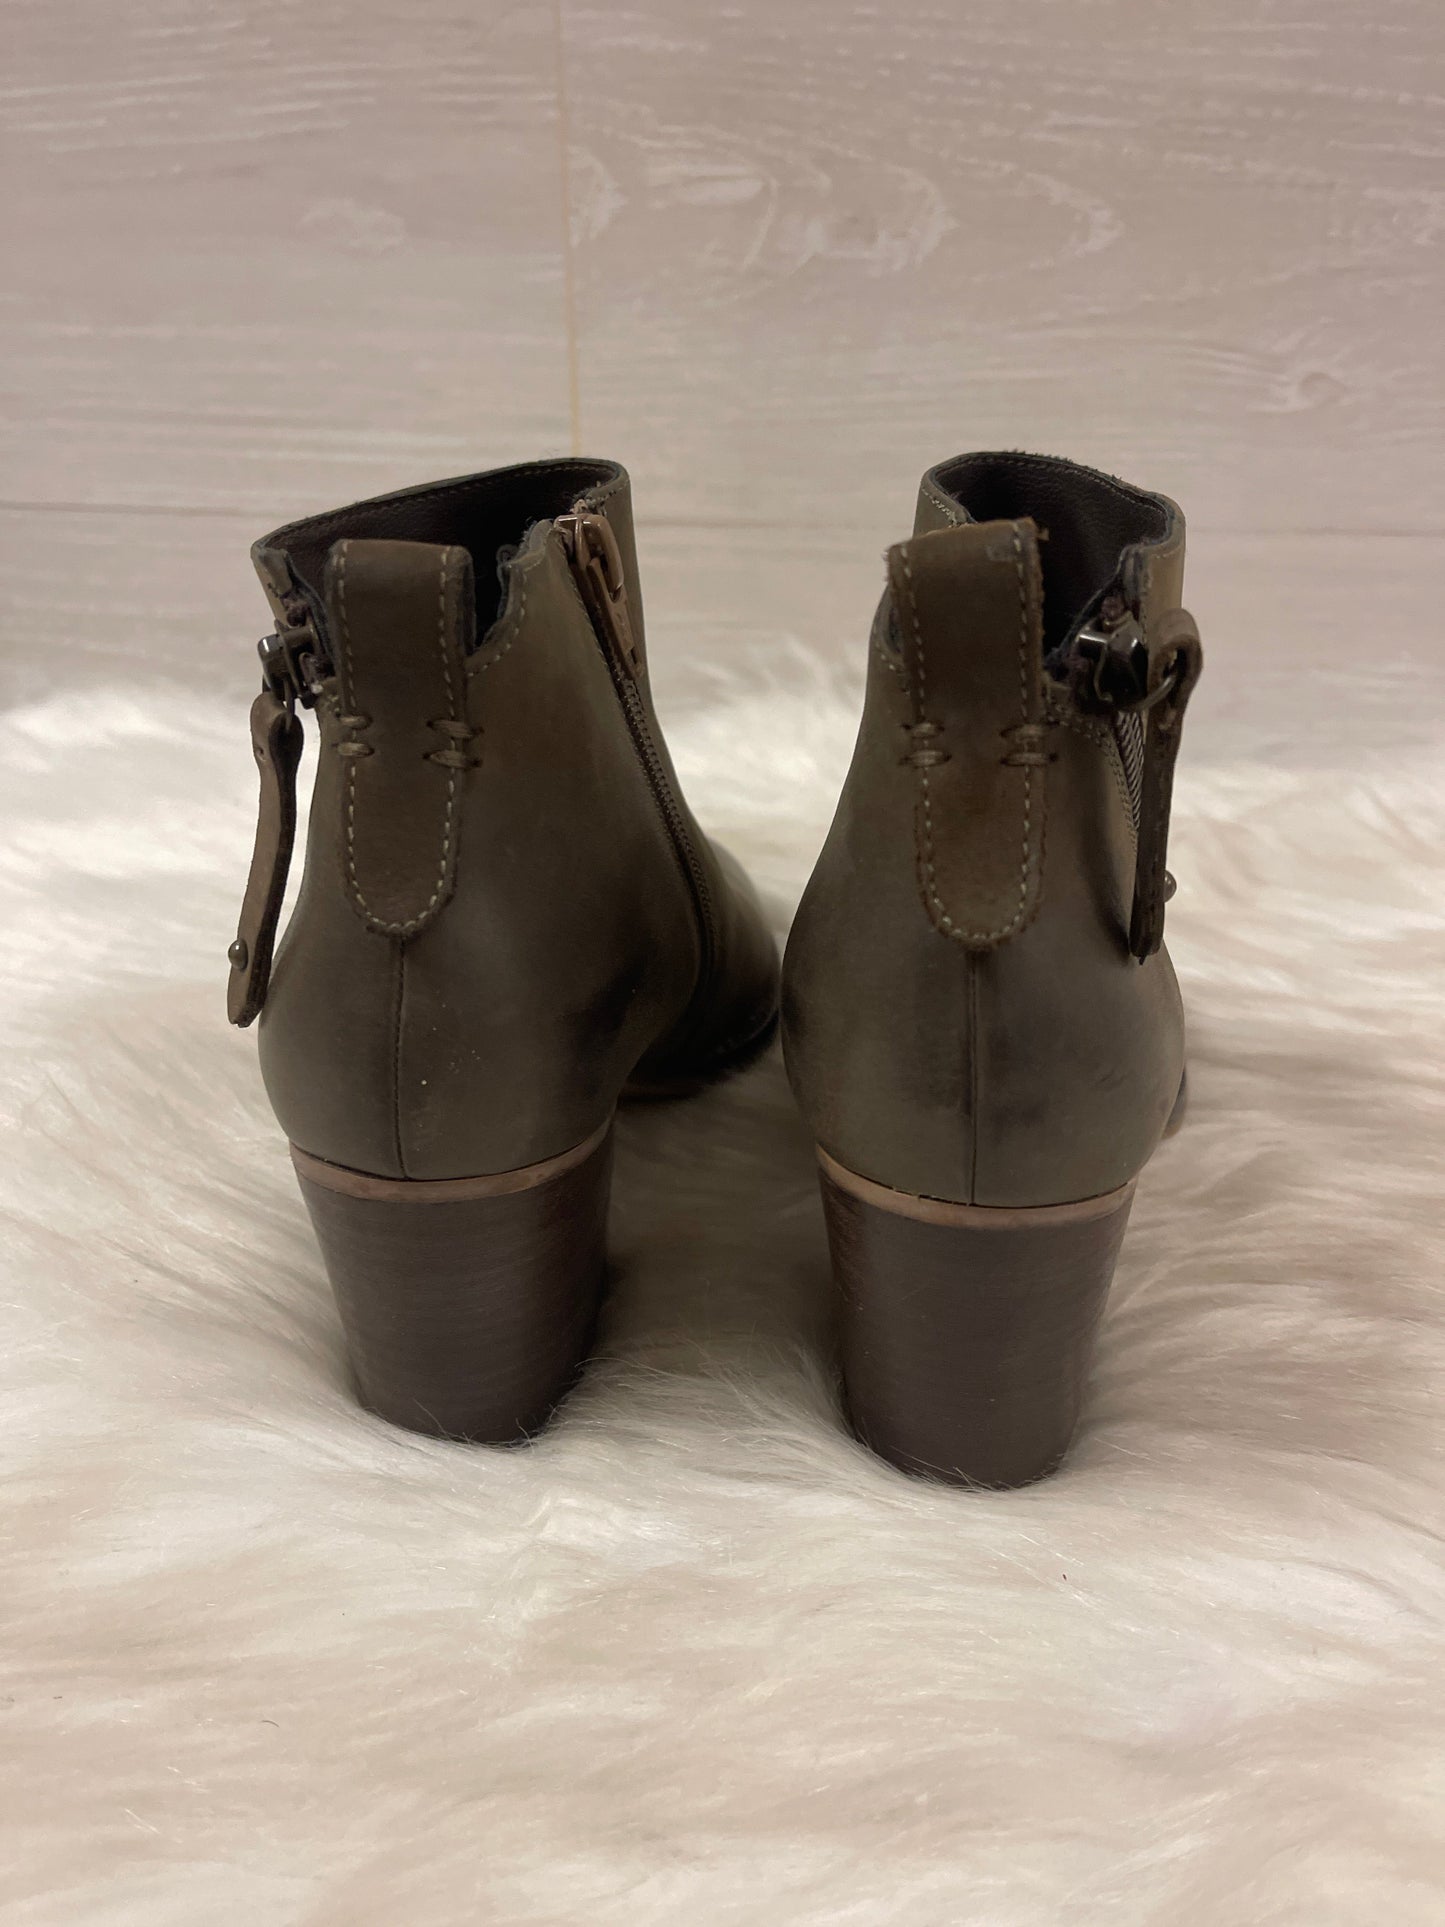 Boots Ankle Heels By Blondo  Size: 7.5